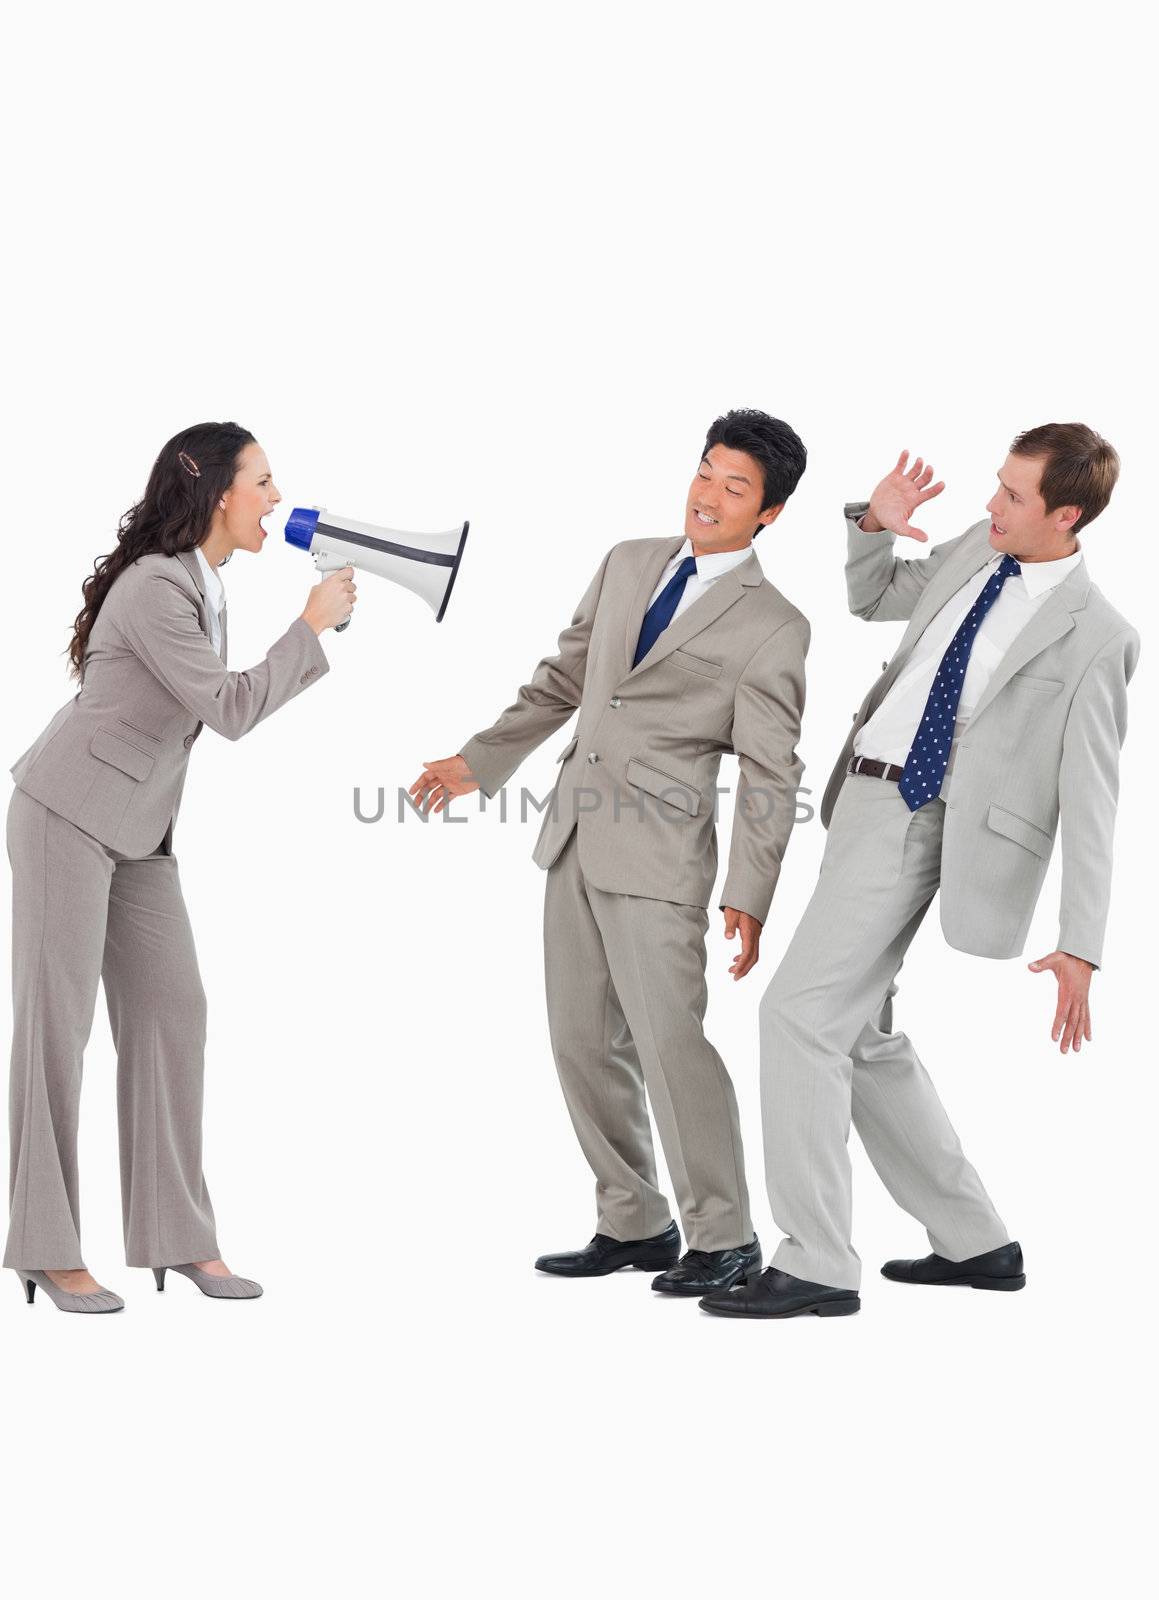 Saleswoman with megaphone yelling at colleagues against a white background